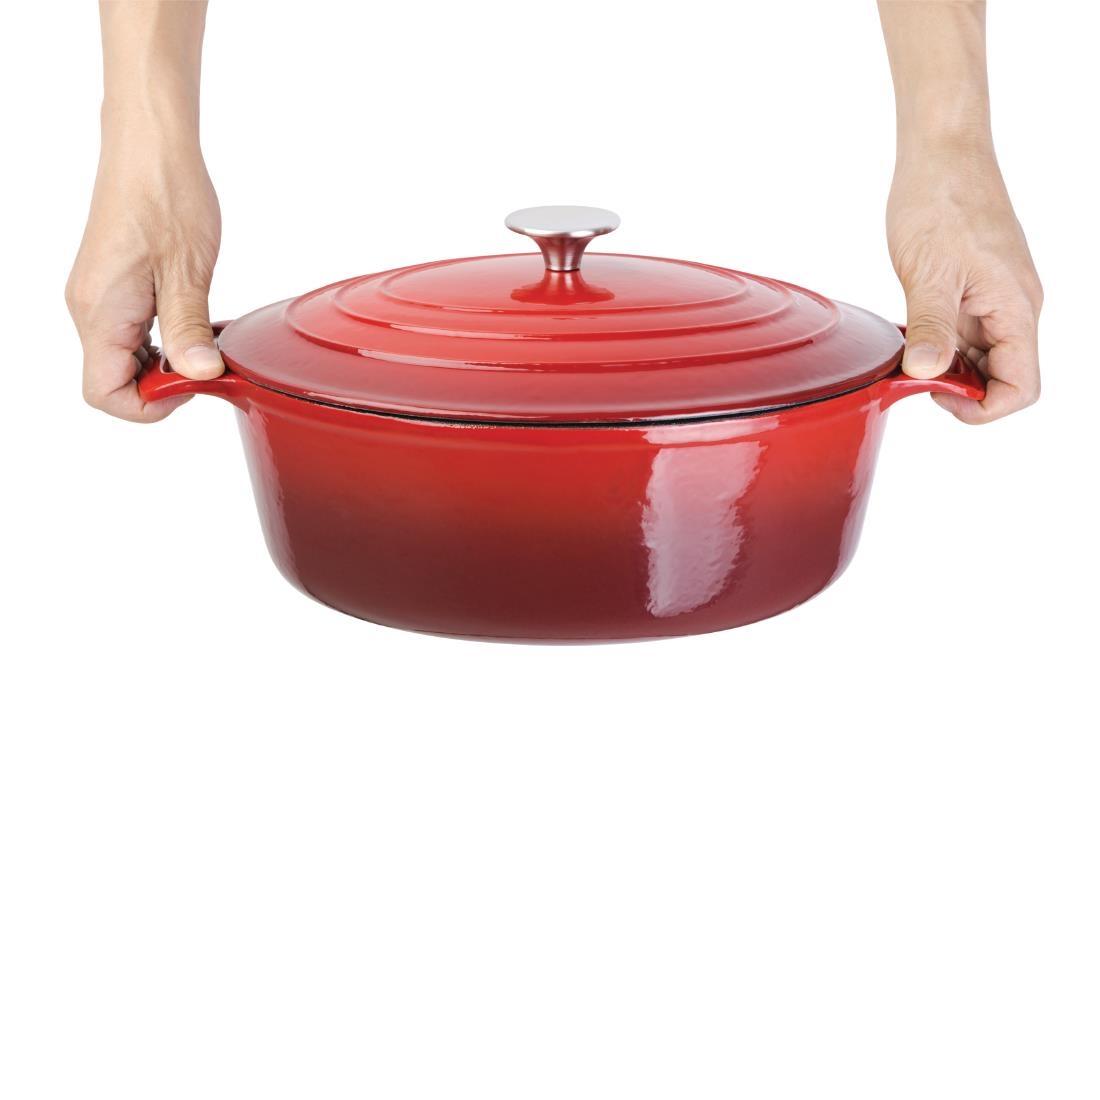 Vogue Red Oval Casserole Dish 6Ltr - GH314  - 4